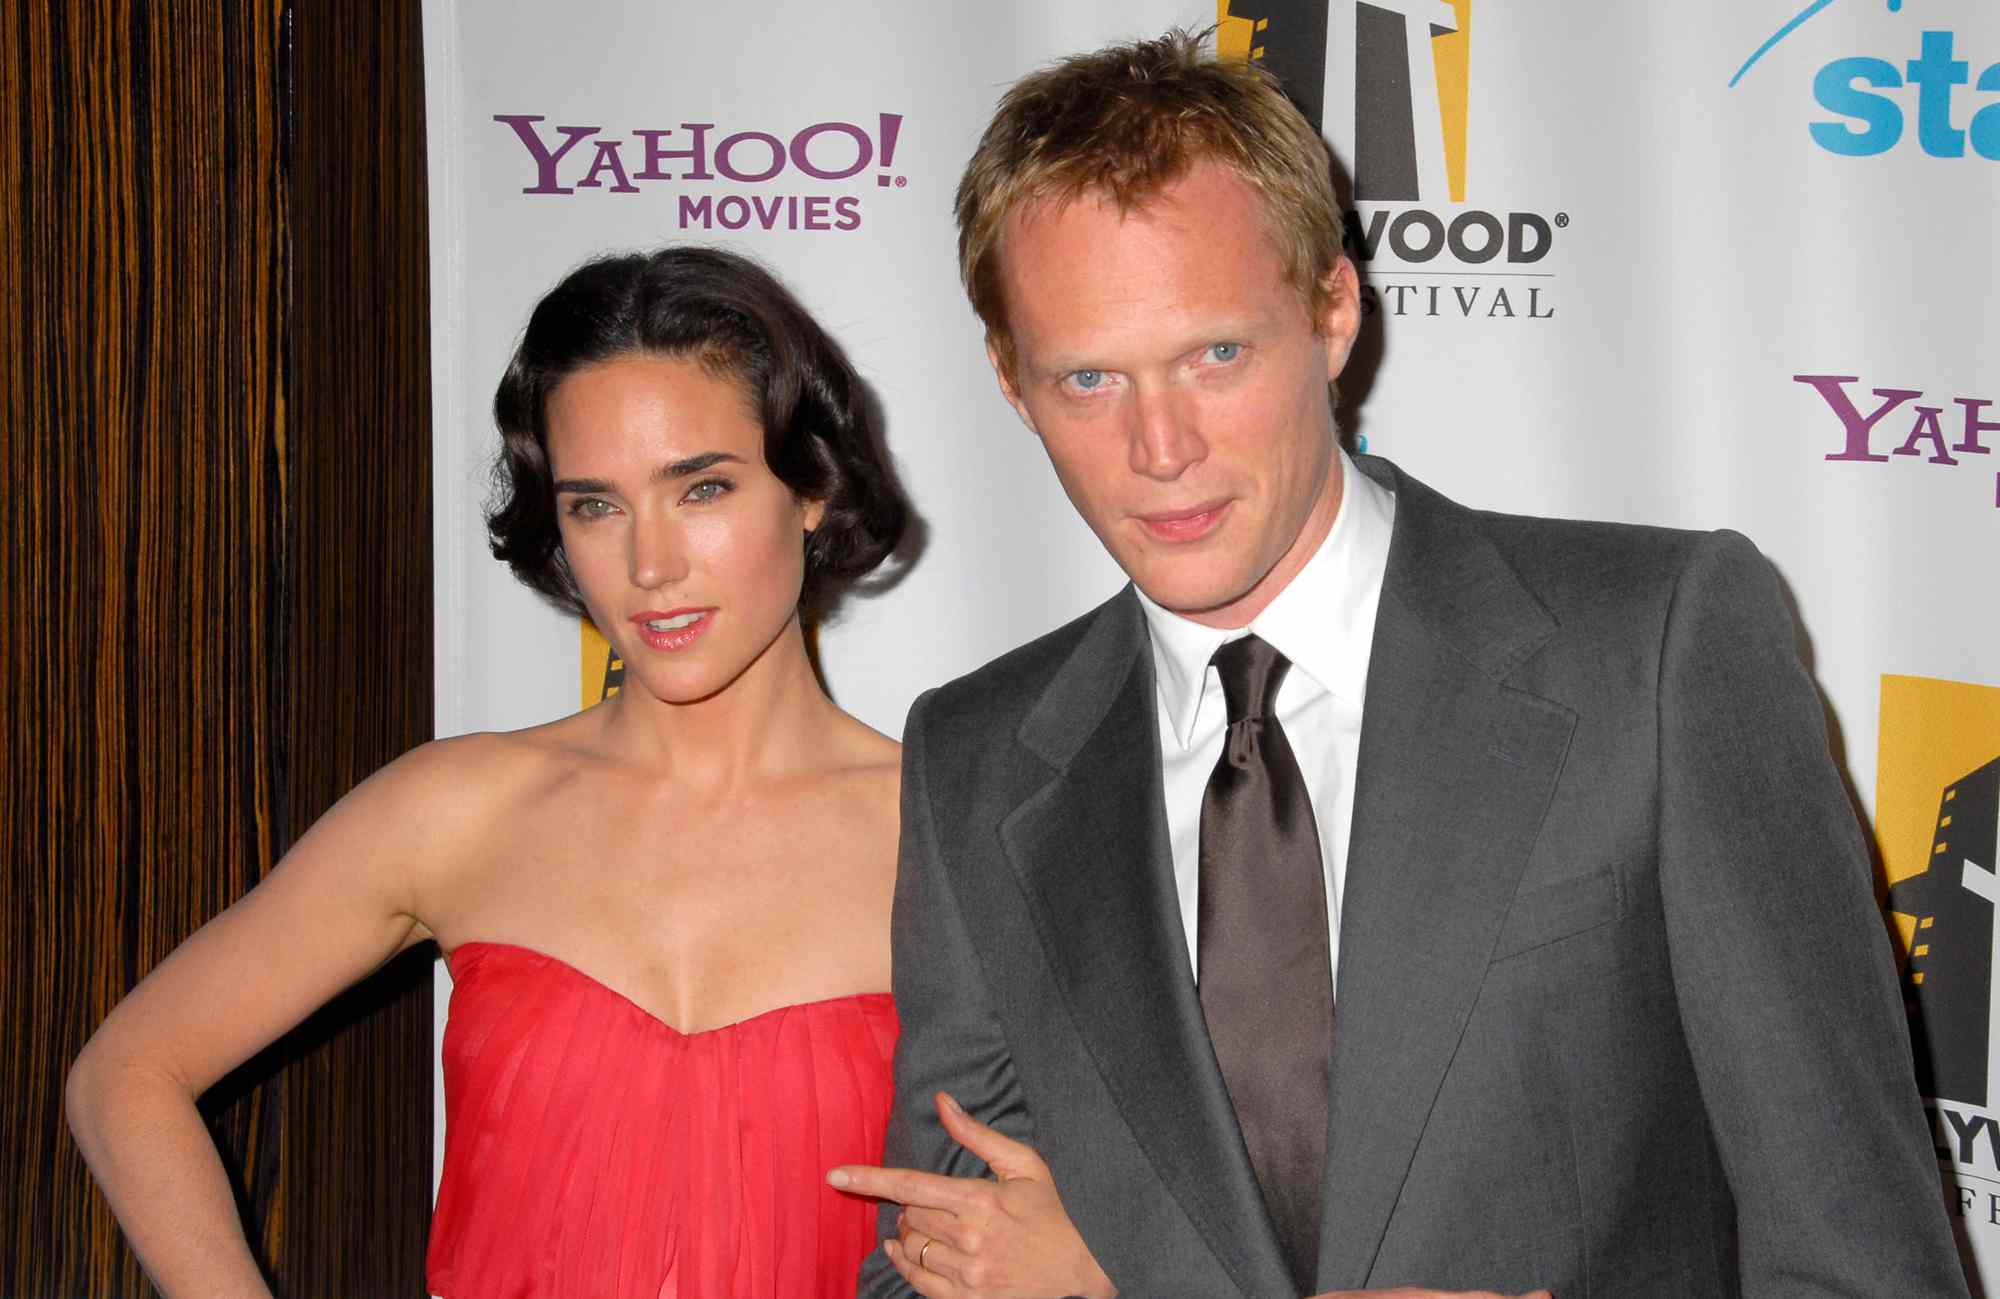 Actress Jennifer Connelly and actor Paul Bettany arrive to Hollywood Film Festival's Hollywood Awards at the Beverly Hilton Hotel on October 22, 2007 in Beverly Hills, California